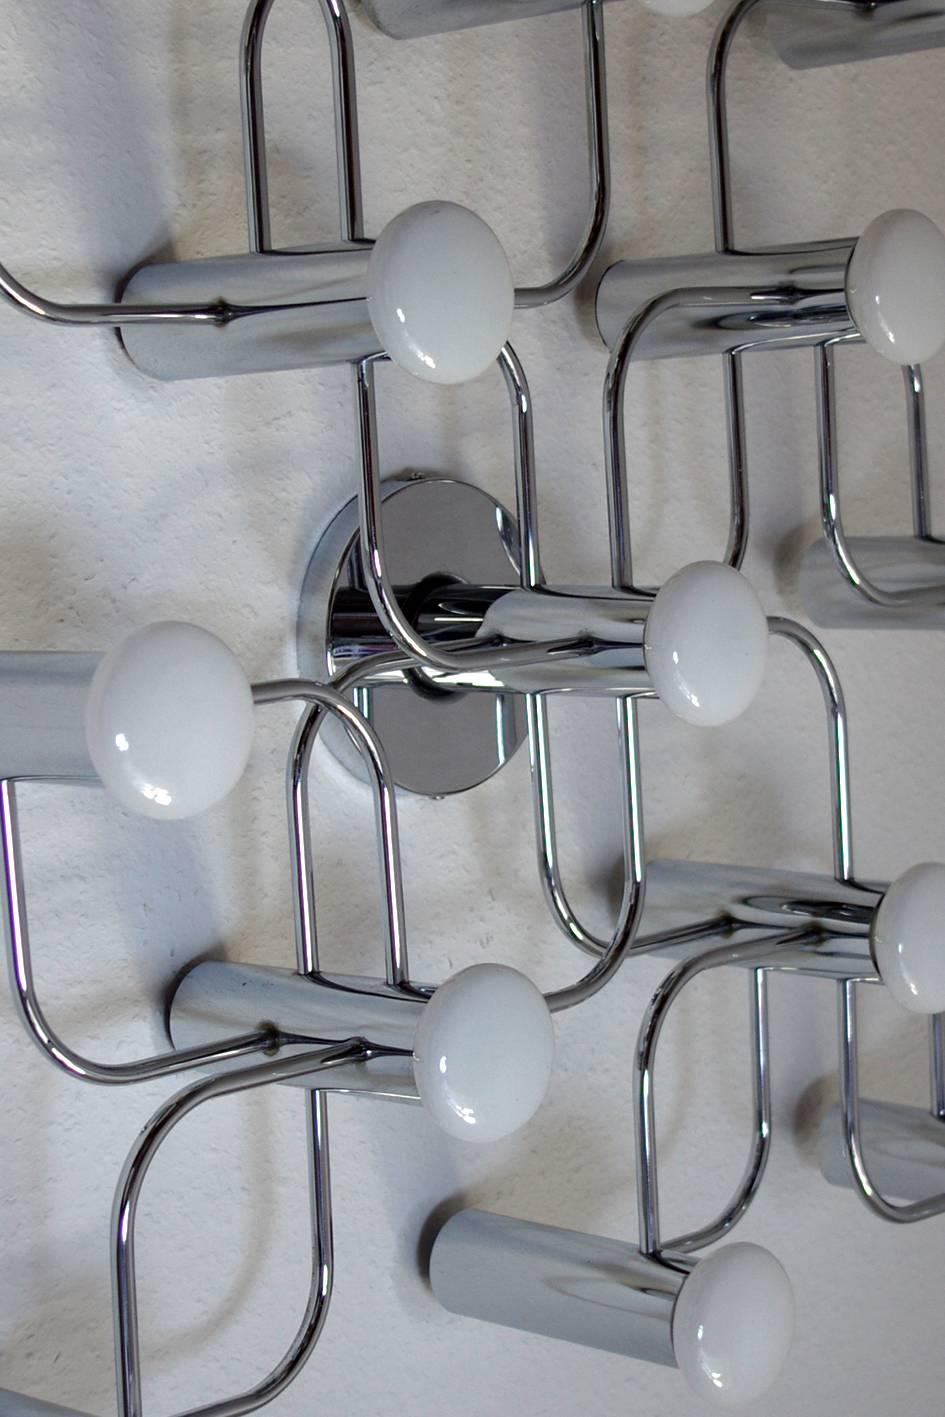 Minimalist Sculptural Ceiling or Wall Flush Mount Chandelier by Leola, 1960s